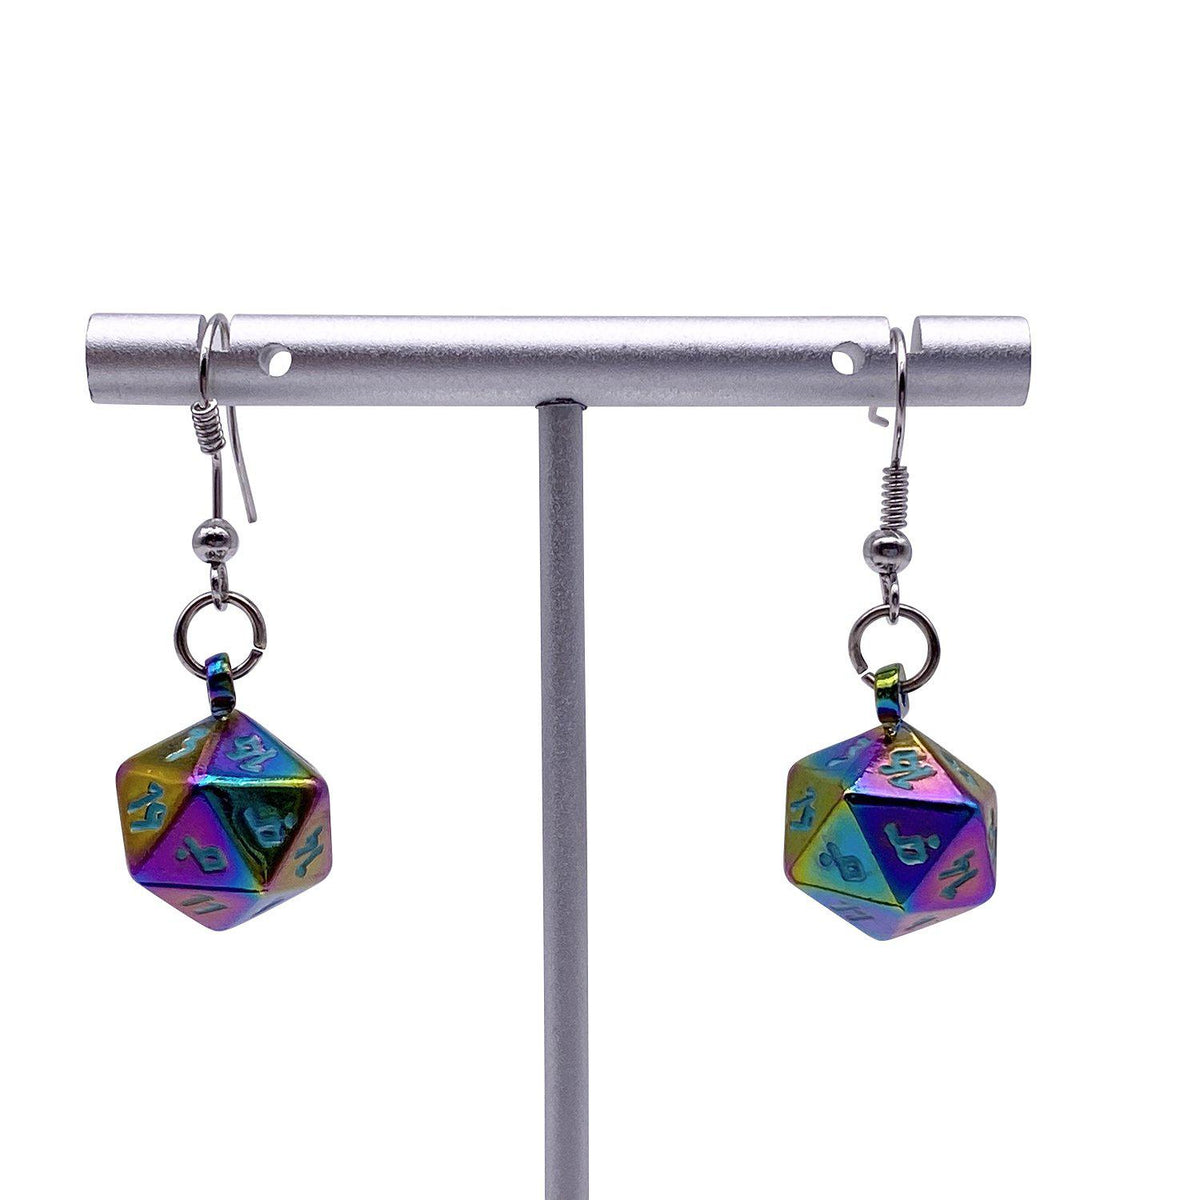 Queens Treasure - Ioun Stone D20 Dice Earrings by Norse Foundry